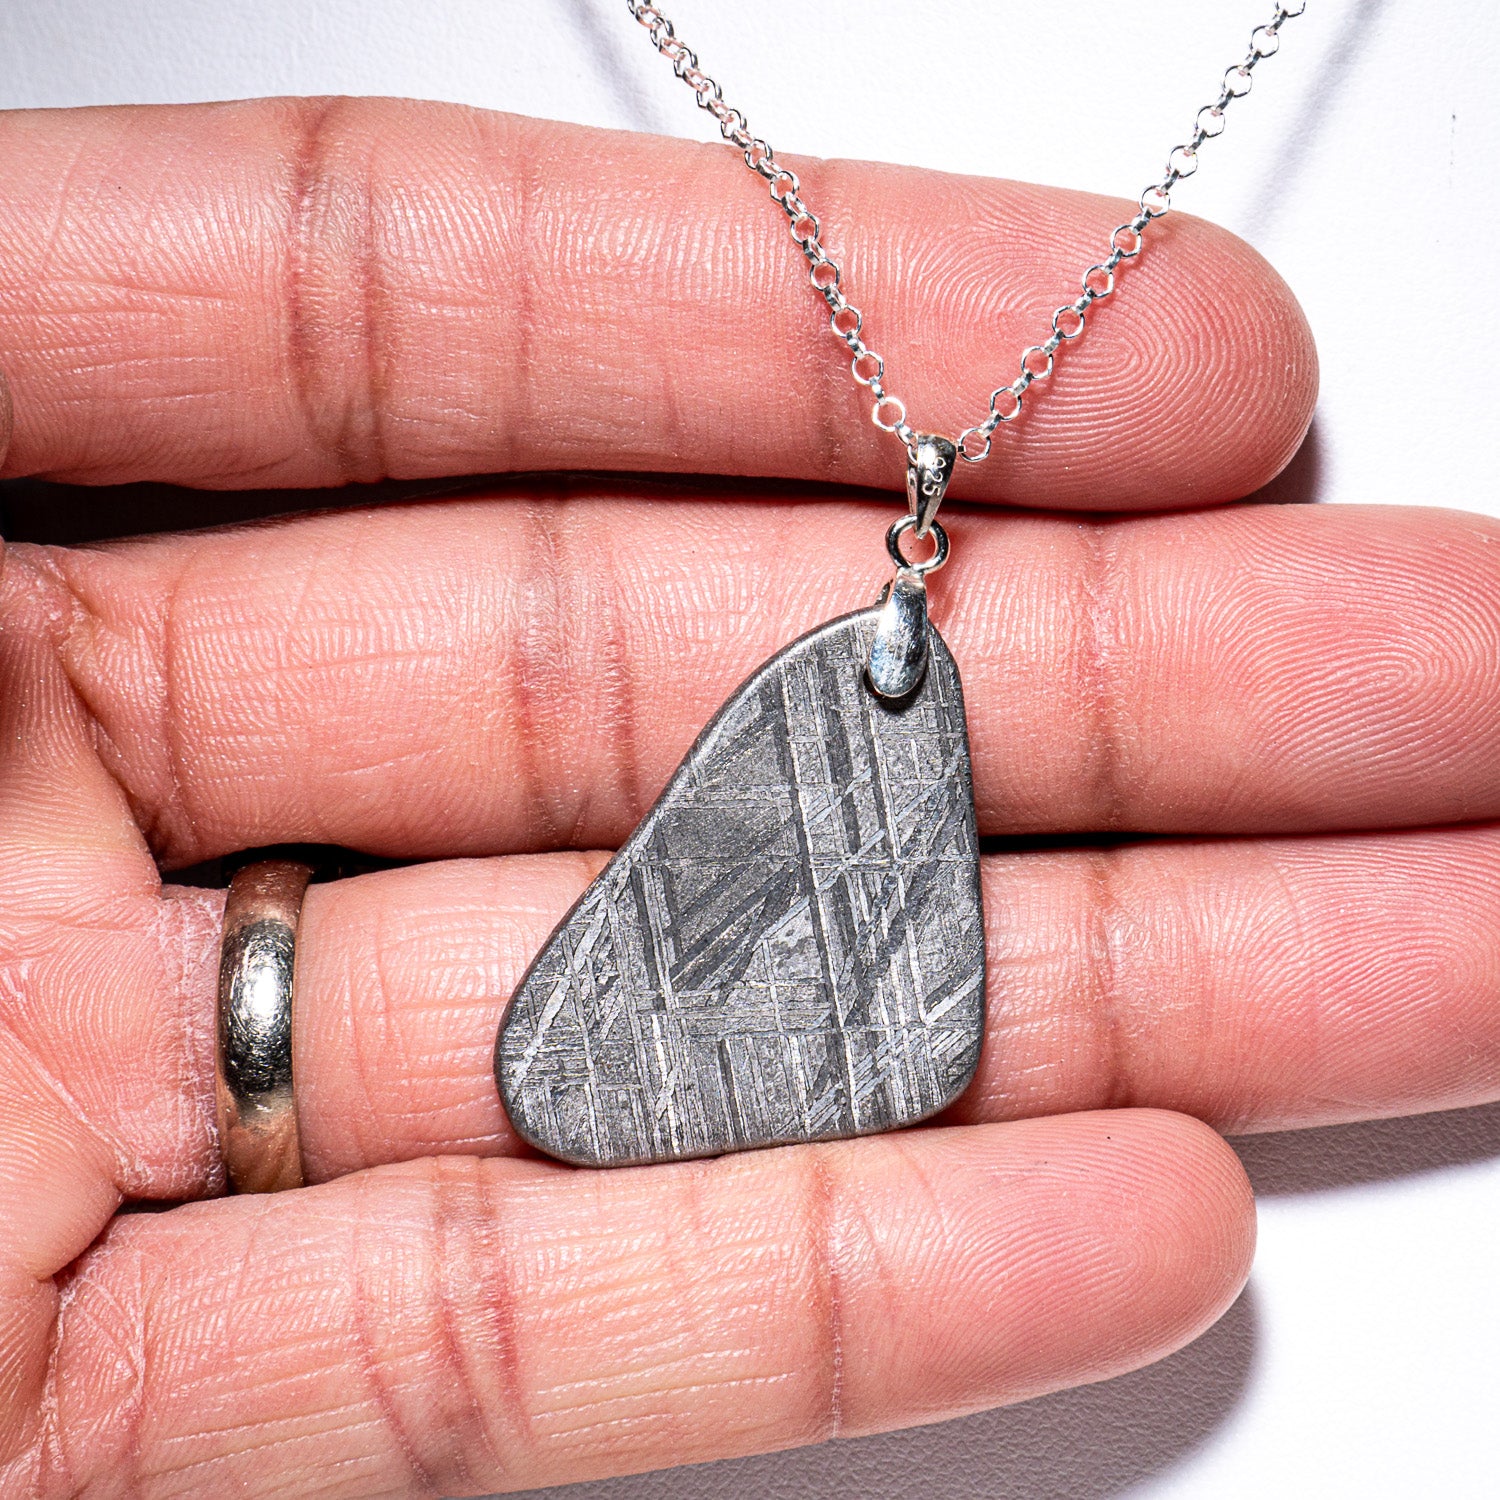 Polished Seymchan Meteorite pendant (11.9 grams) with 18" Sterling Silver Chain